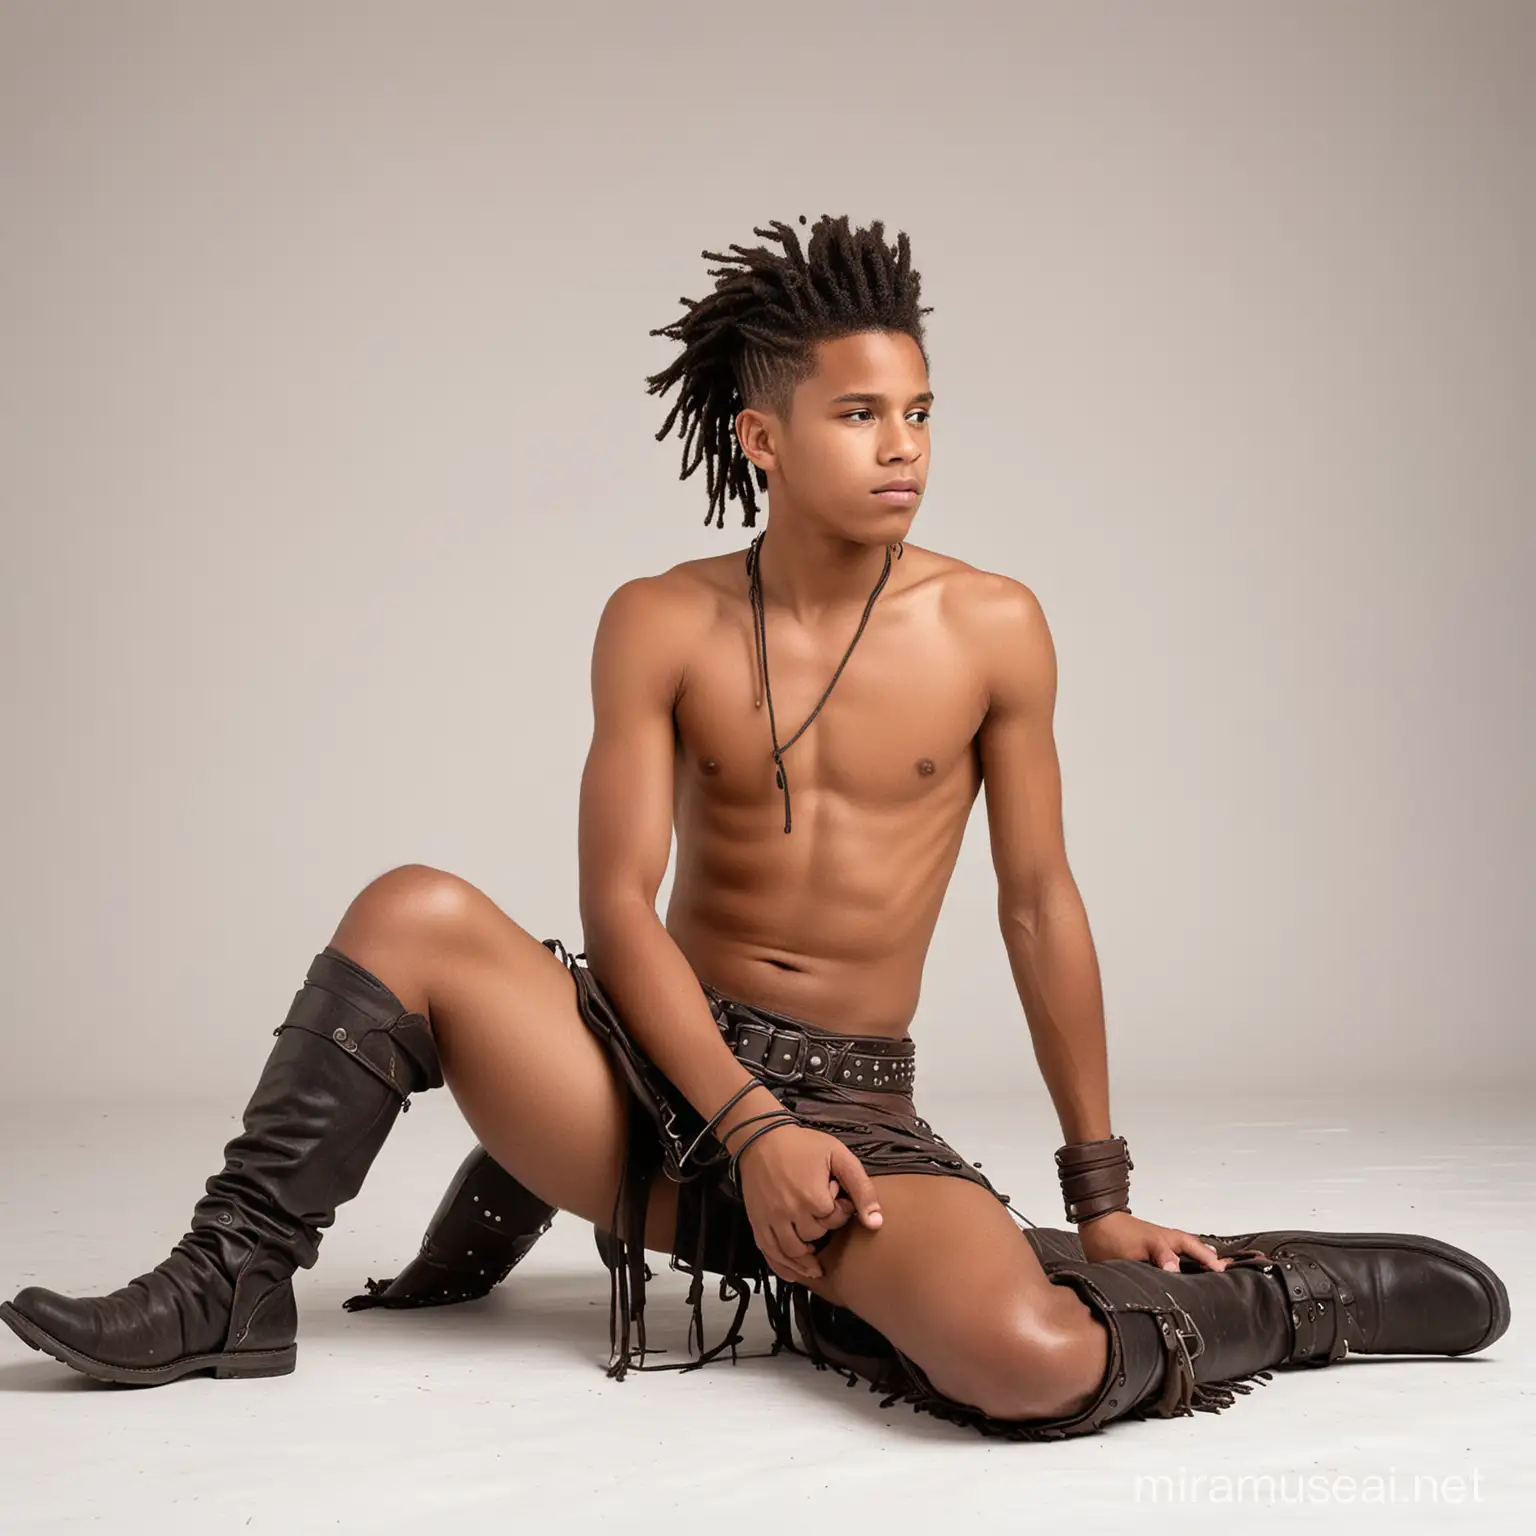 Youthful Warrior with Dreadlocks in Short Loincloth and Leather Boots